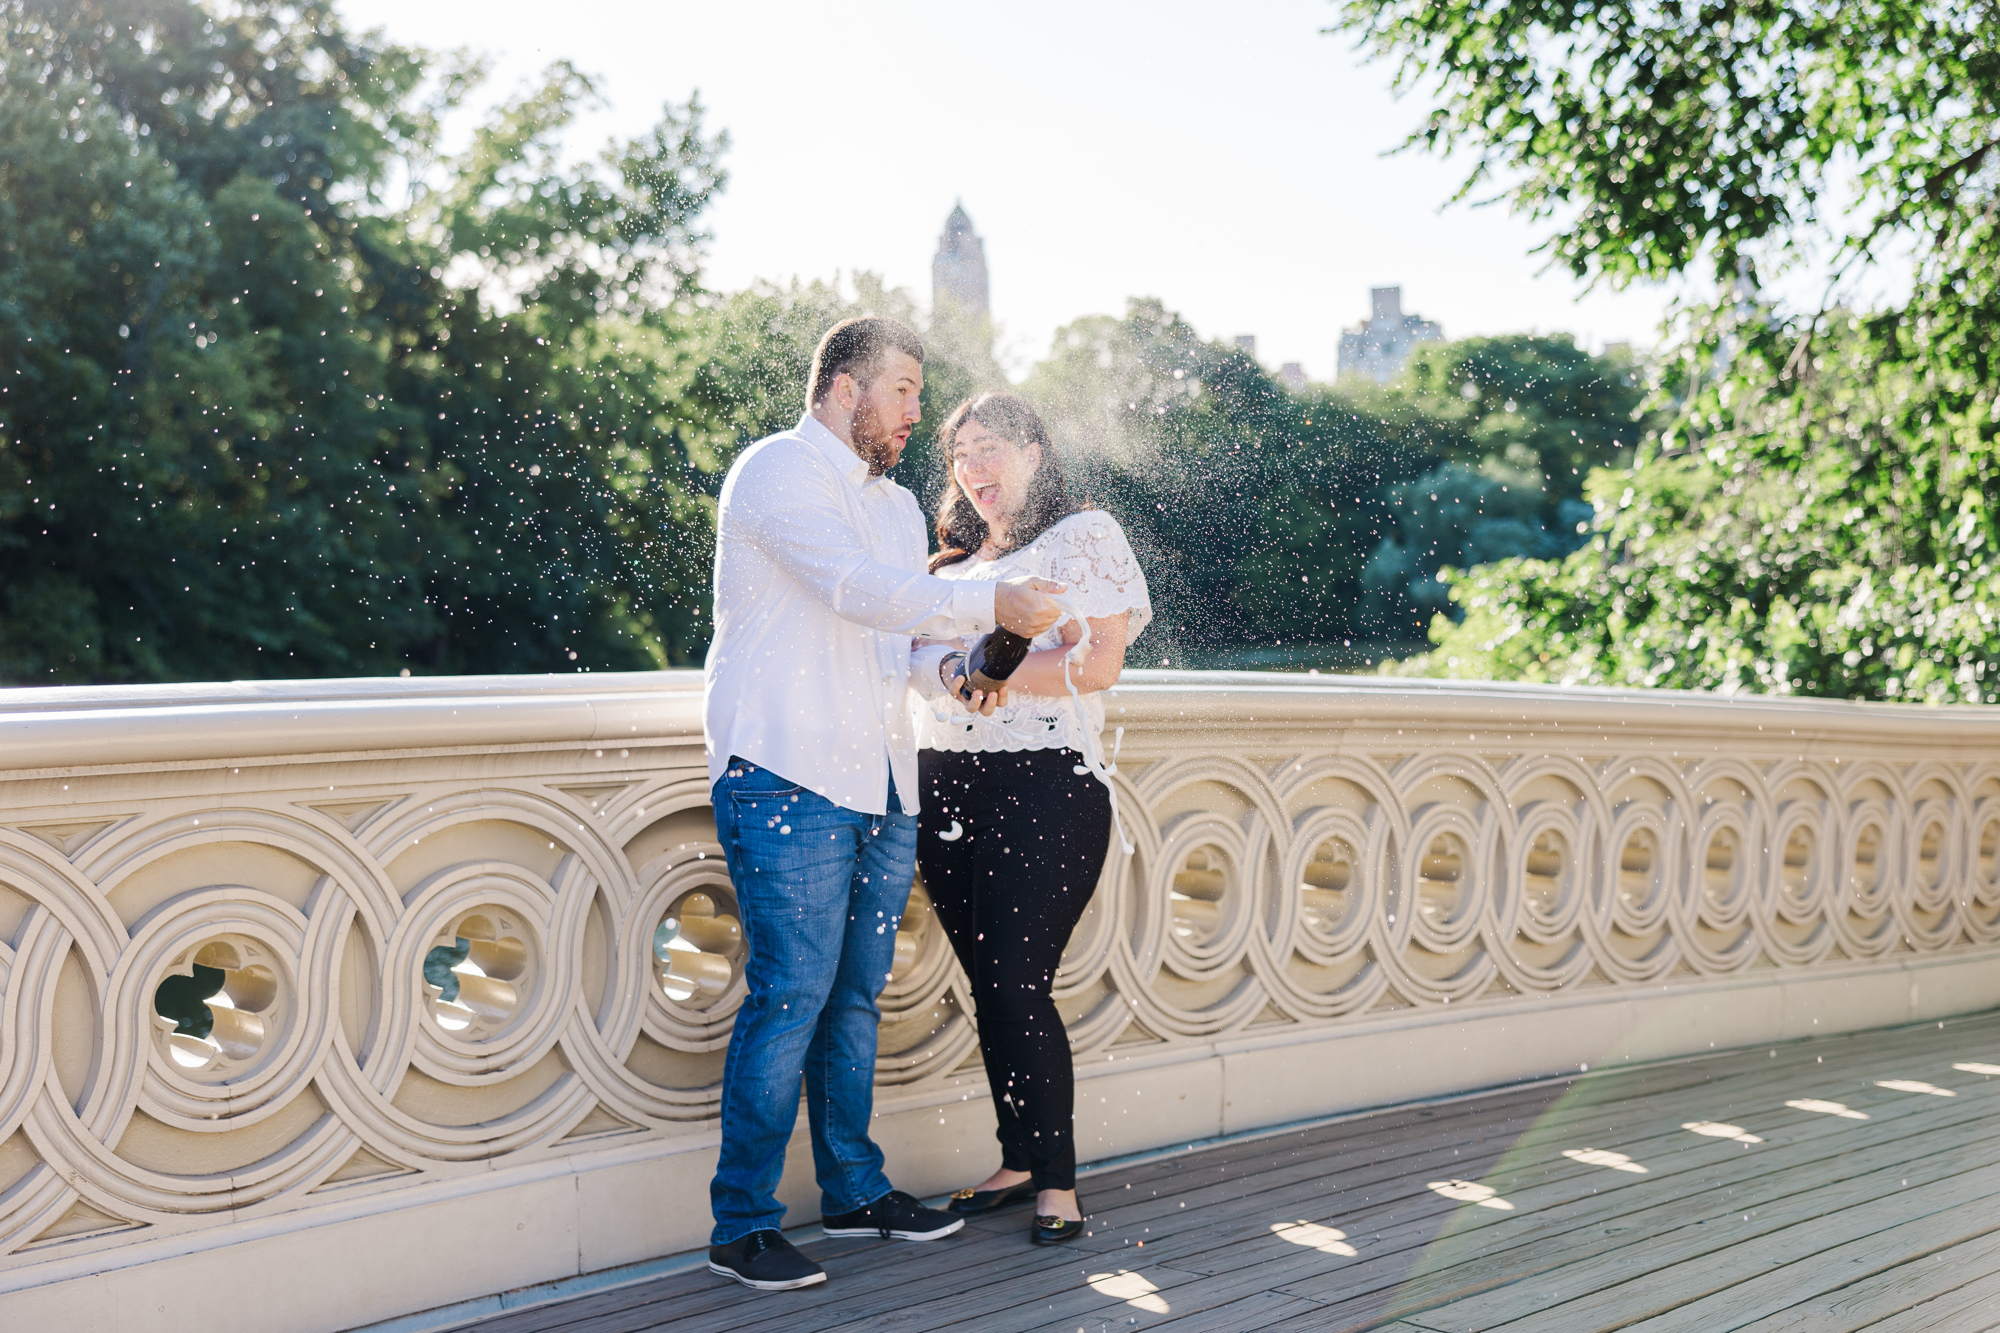 Cute Central Park Engagement Photos in New York